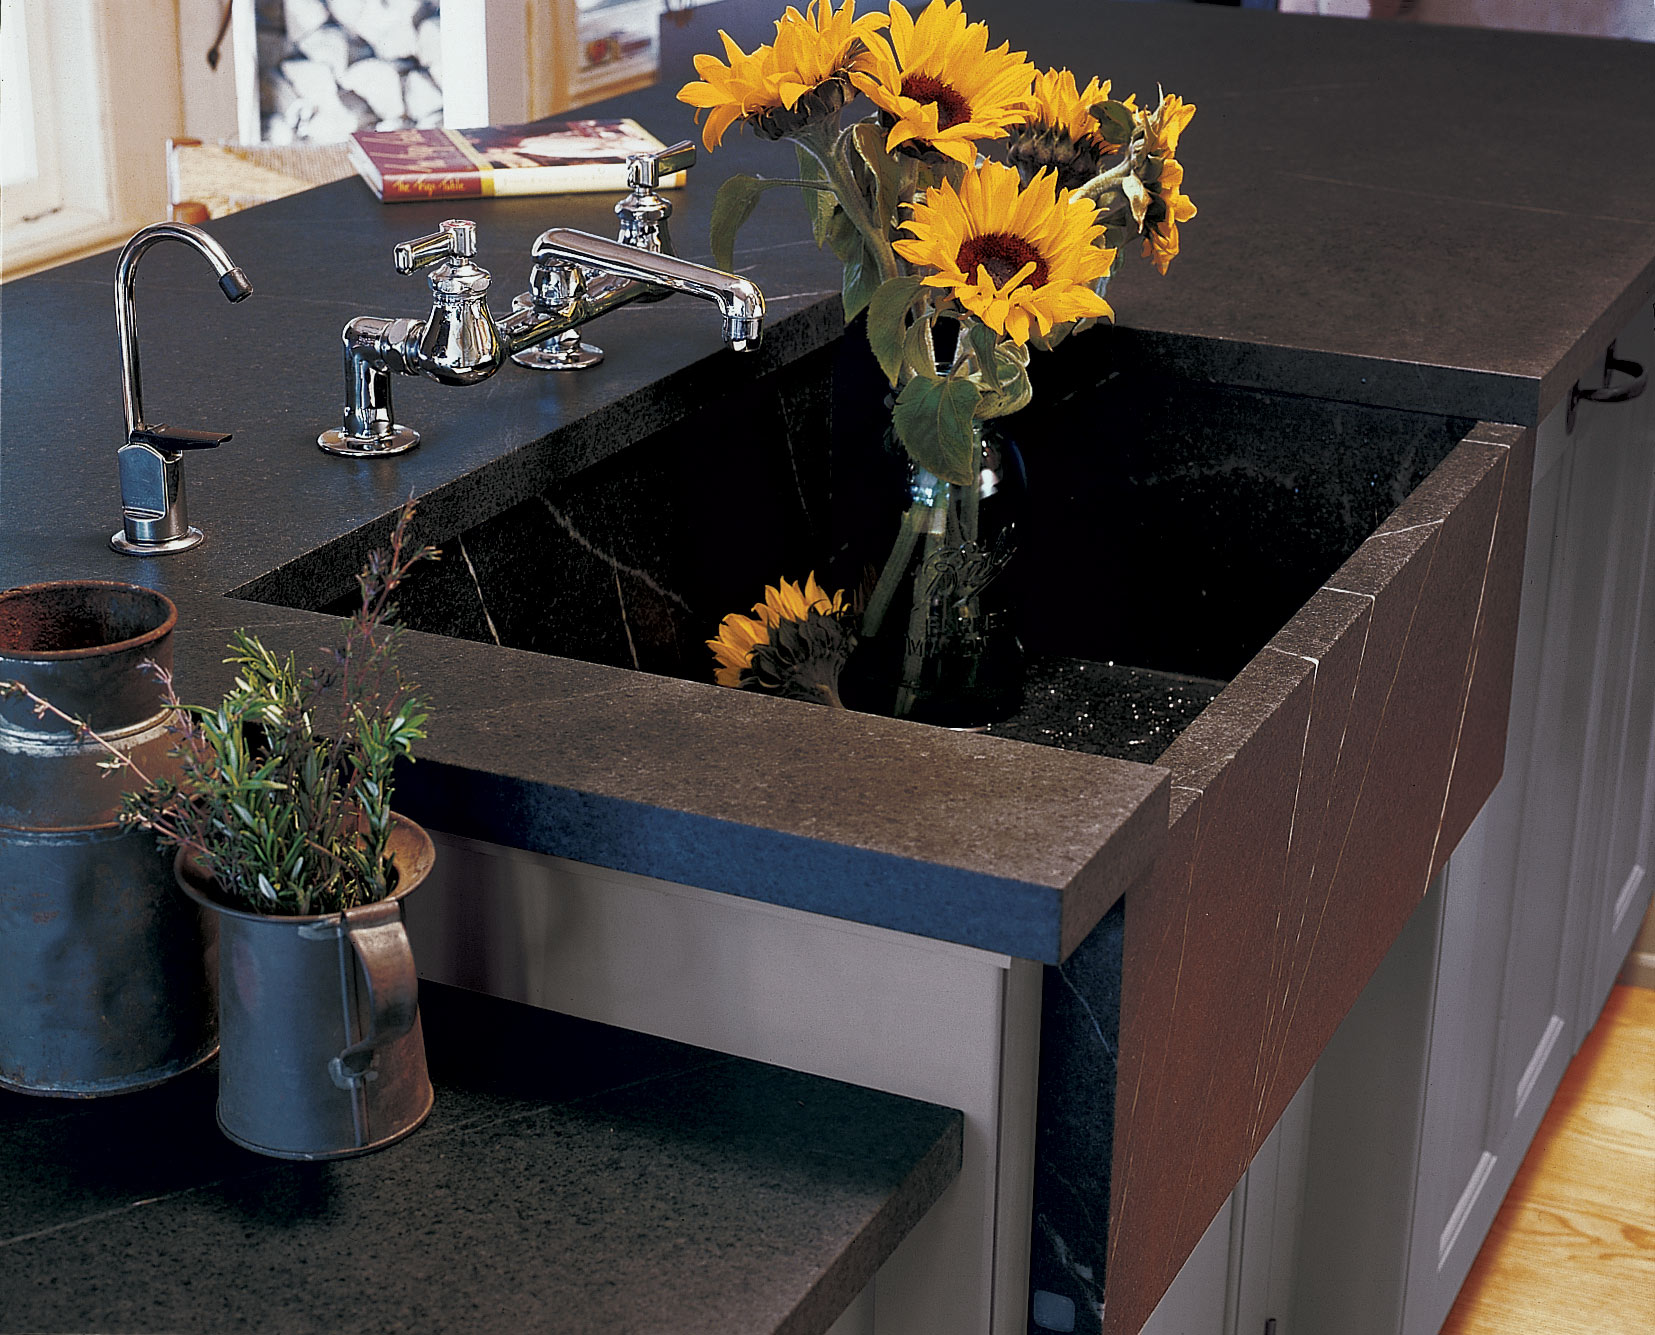 Vermont Soapstone sinks are timeless, handcrafted and guaranteed forever